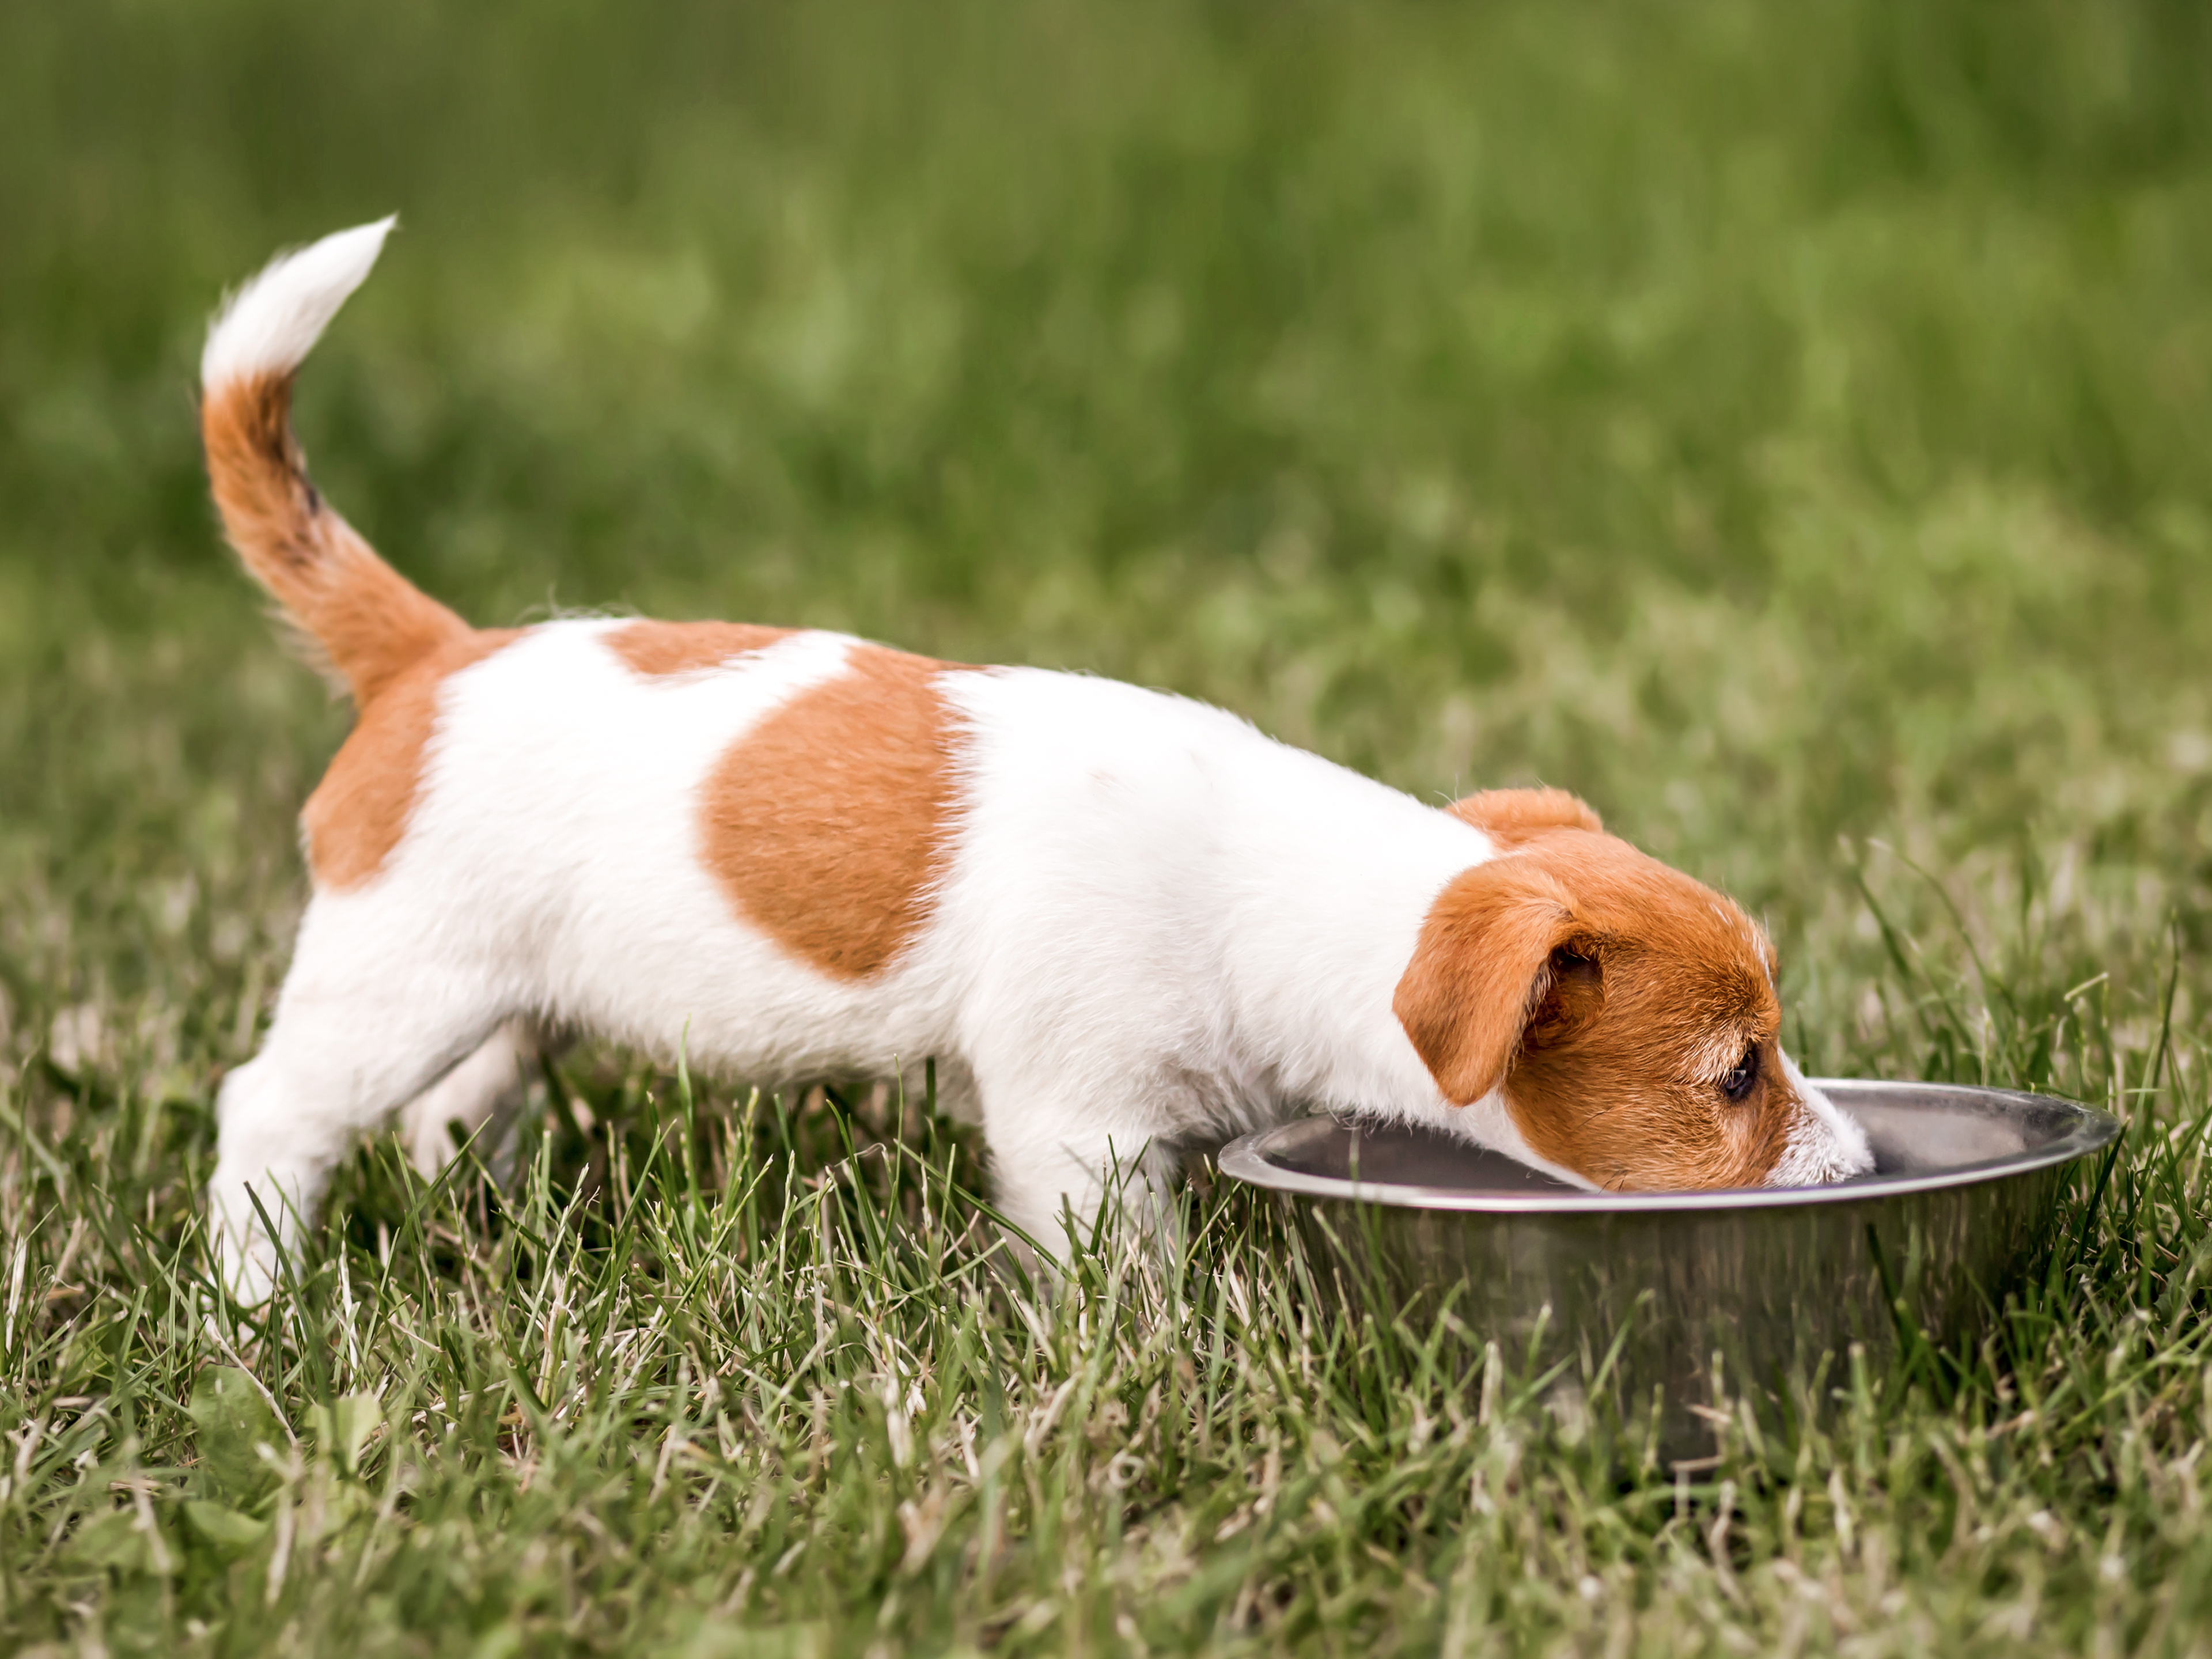 Jack Russell Terrier puppy eating from a stainless steel bowl outdoors